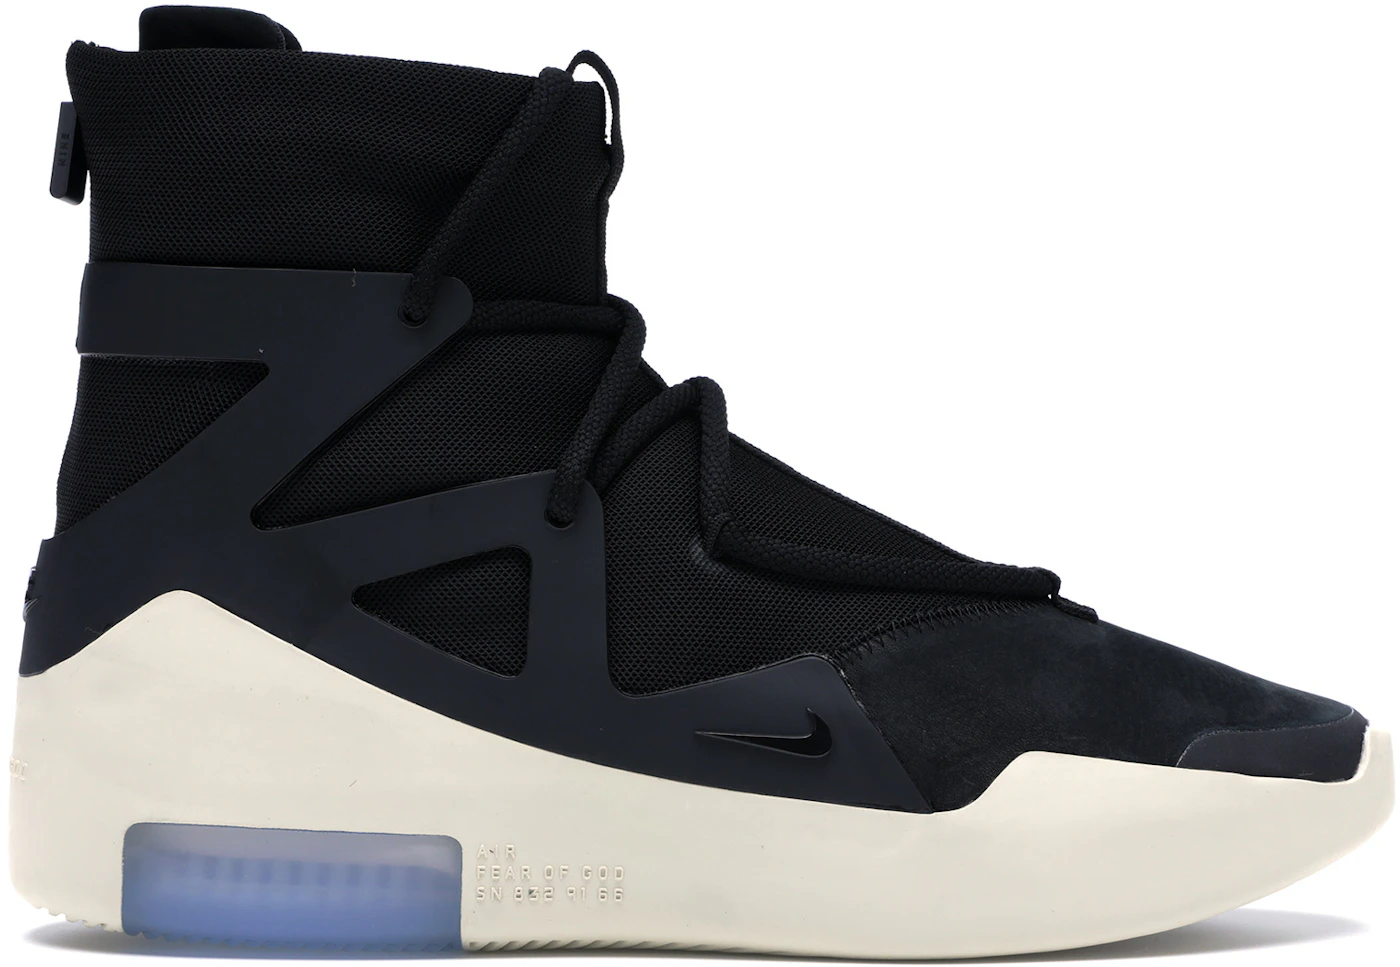 Nike Fear of God 1: How & Where to Buy